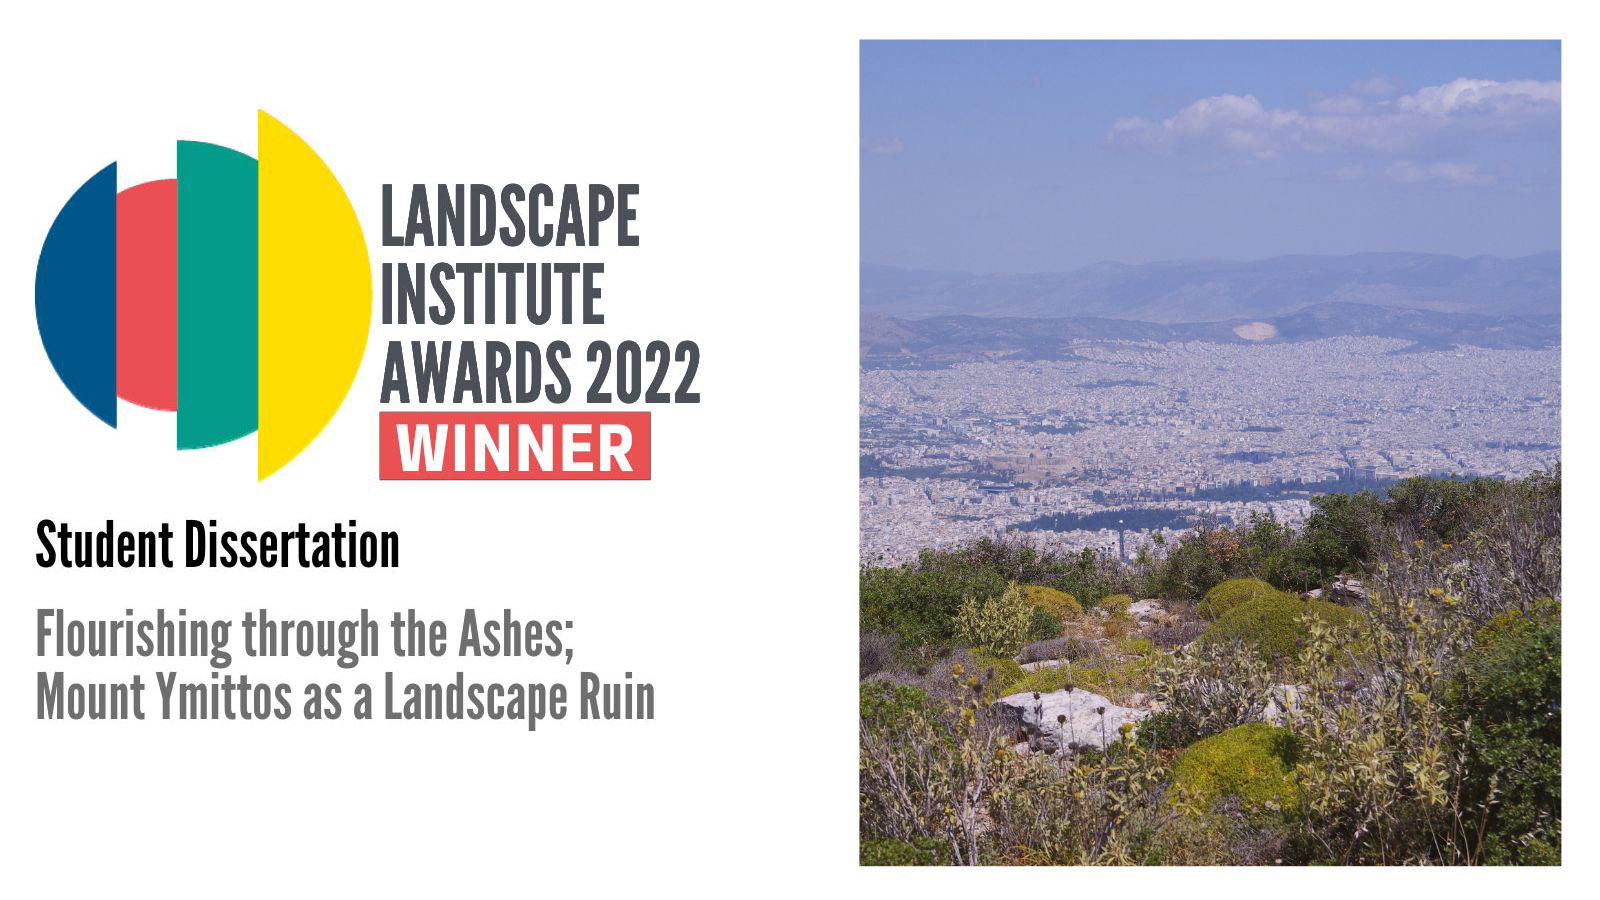 Archisearch Flourishing through the Ashes: Mount Ymitos as a Landscape Ruin by Alexandra Souvatzi | Winner of the Student Dissertation Award of the Landscape Institute 2022